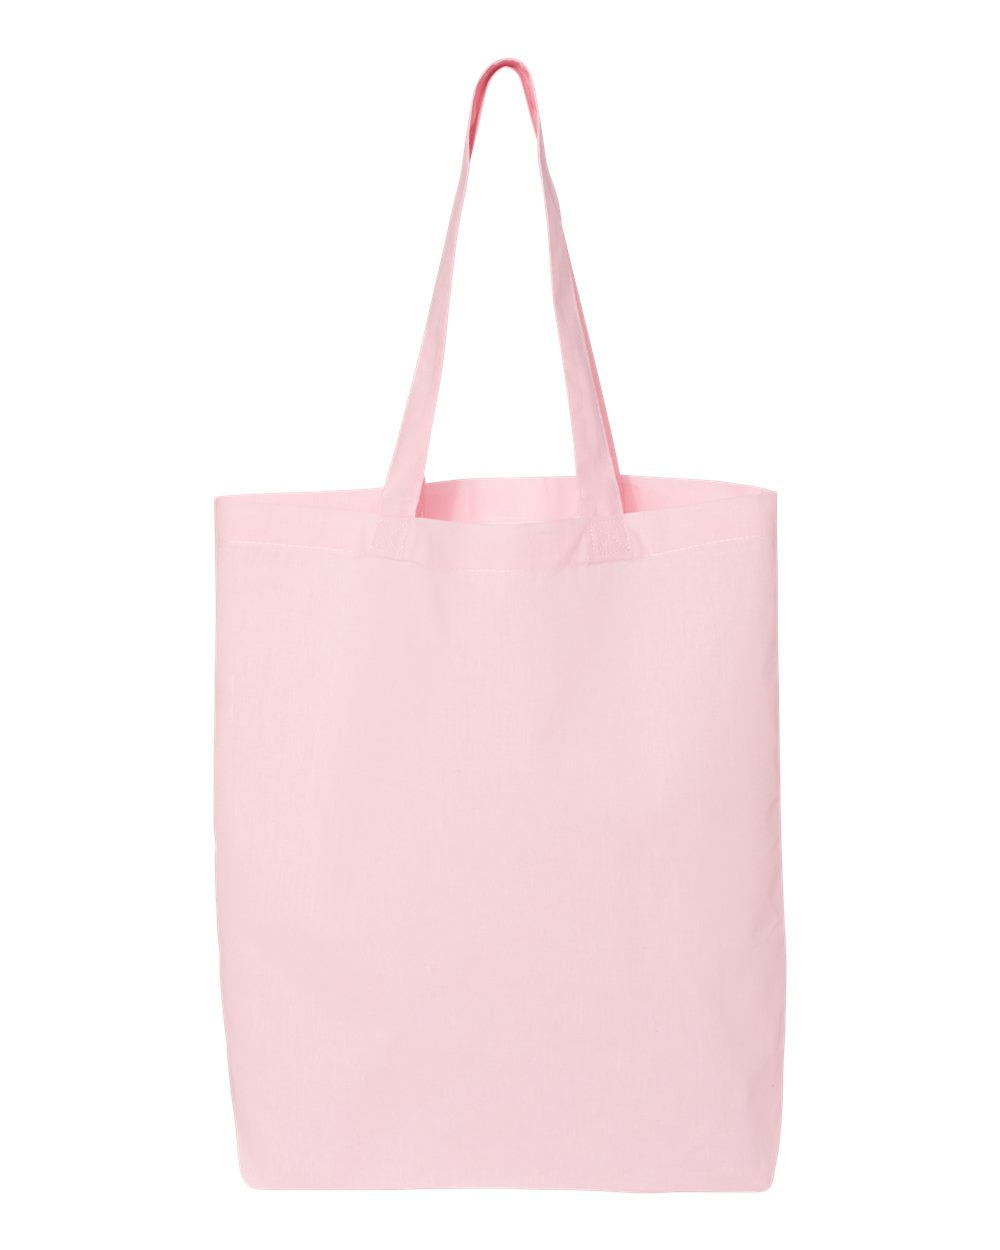 Pink Tote Bag Blank, Pink Canvas Totes Bags, Blank Tote Bags for